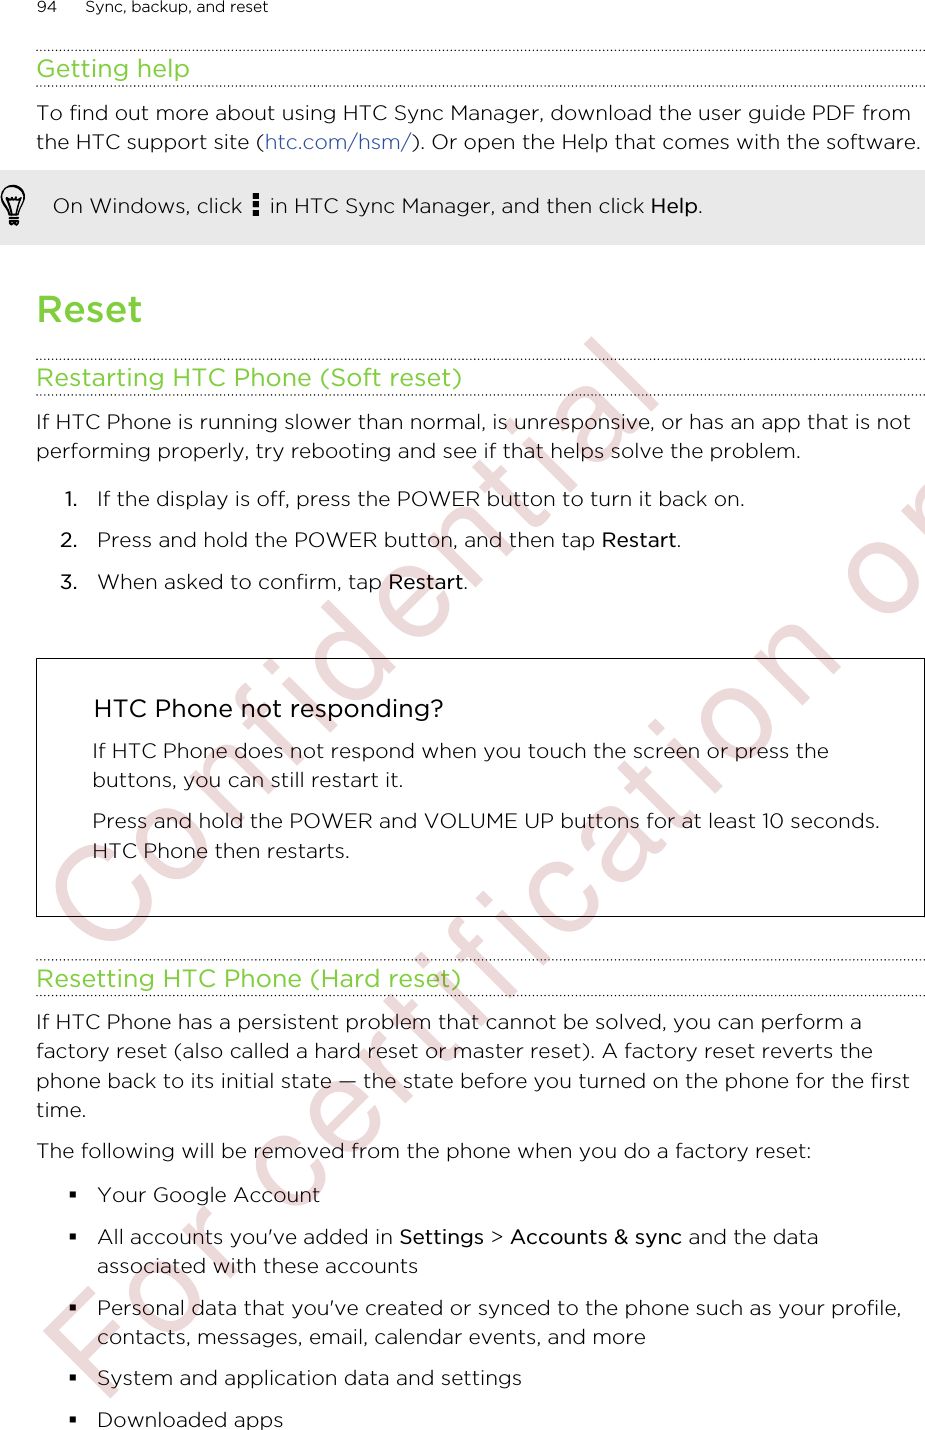 Getting helpTo find out more about using HTC Sync Manager, download the user guide PDF fromthe HTC support site (htc.com/hsm/). Or open the Help that comes with the software.On Windows, click   in HTC Sync Manager, and then click Help.ResetRestarting HTC Phone (Soft reset)If HTC Phone is running slower than normal, is unresponsive, or has an app that is notperforming properly, try rebooting and see if that helps solve the problem.1. If the display is off, press the POWER button to turn it back on.2. Press and hold the POWER button, and then tap Restart.3. When asked to confirm, tap Restart.HTC Phone not responding?If HTC Phone does not respond when you touch the screen or press thebuttons, you can still restart it.Press and hold the POWER and VOLUME UP buttons for at least 10 seconds.HTC Phone then restarts.Resetting HTC Phone (Hard reset)If HTC Phone has a persistent problem that cannot be solved, you can perform afactory reset (also called a hard reset or master reset). A factory reset reverts thephone back to its initial state — the state before you turned on the phone for the firsttime.The following will be removed from the phone when you do a factory reset:§Your Google Account§All accounts you&apos;ve added in Settings &gt; Accounts &amp; sync and the dataassociated with these accounts§Personal data that you&apos;ve created or synced to the phone such as your profile,contacts, messages, email, calendar events, and more§System and application data and settings§Downloaded apps94 Sync, backup, and reset        Confident ial  For cert ificat ion only